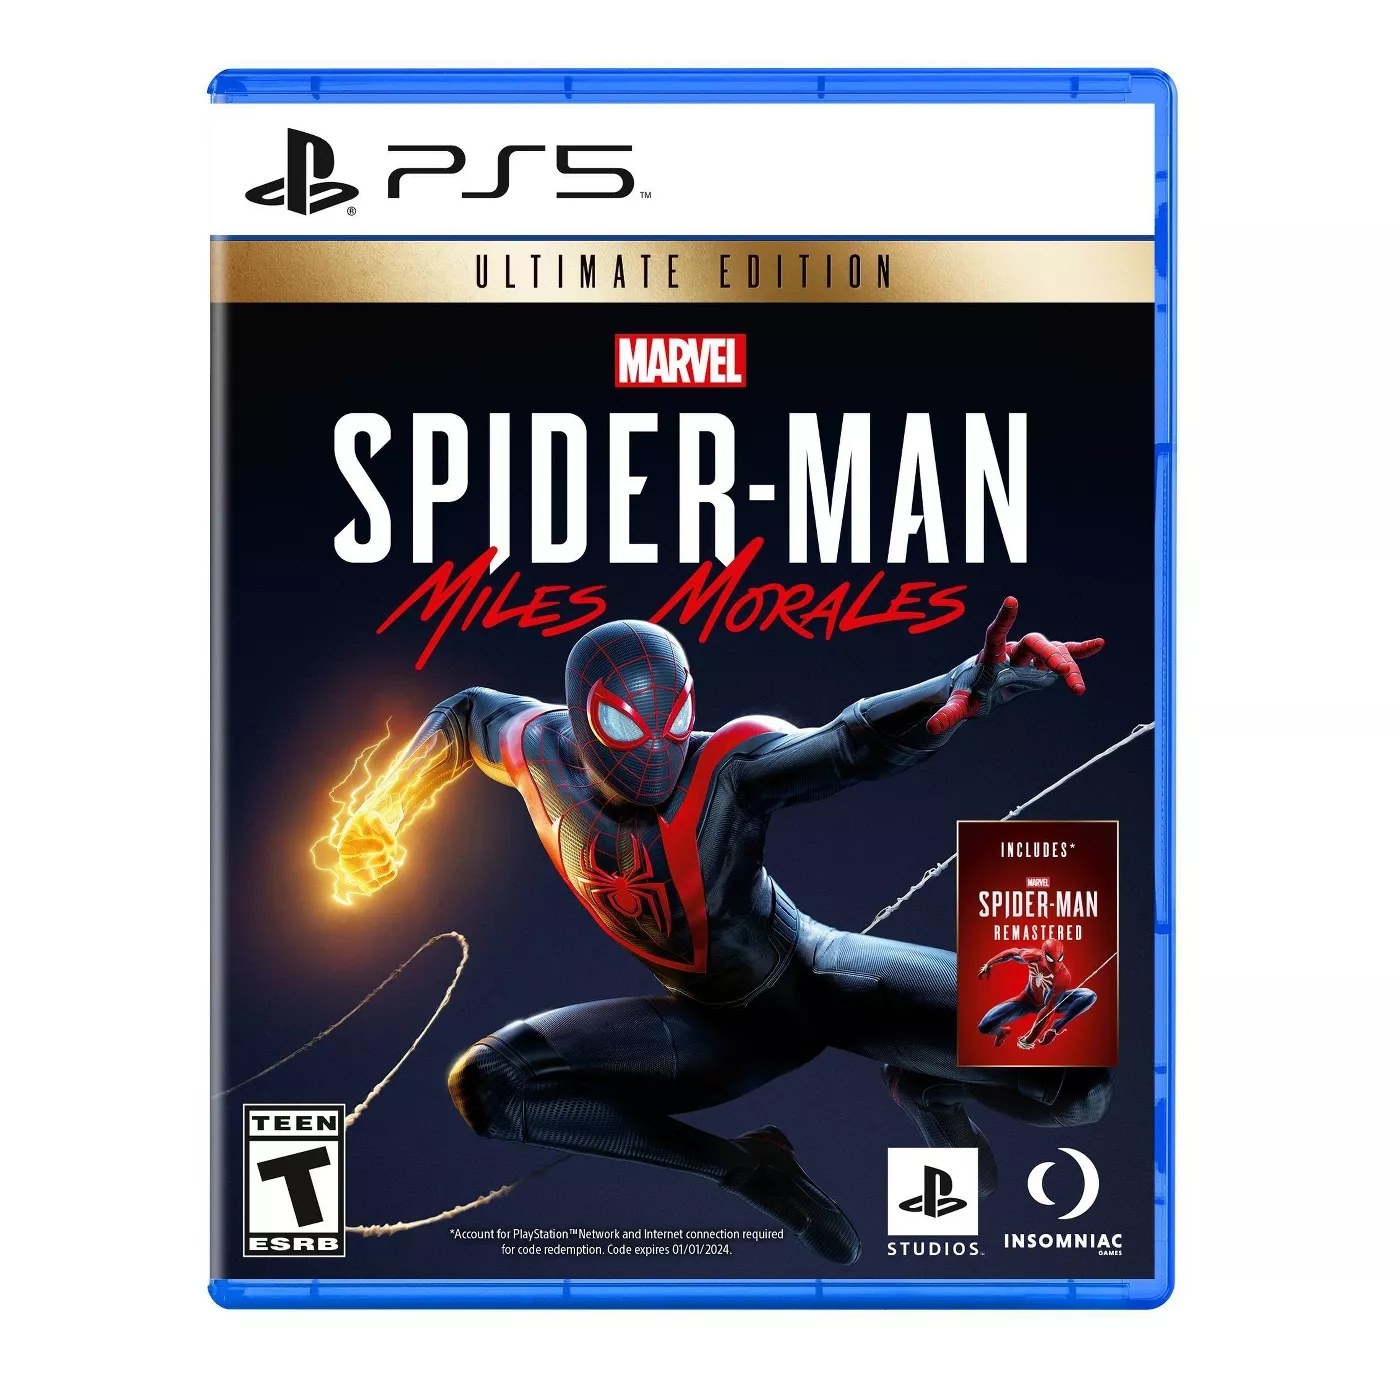 The PS5 Miles Morales video game